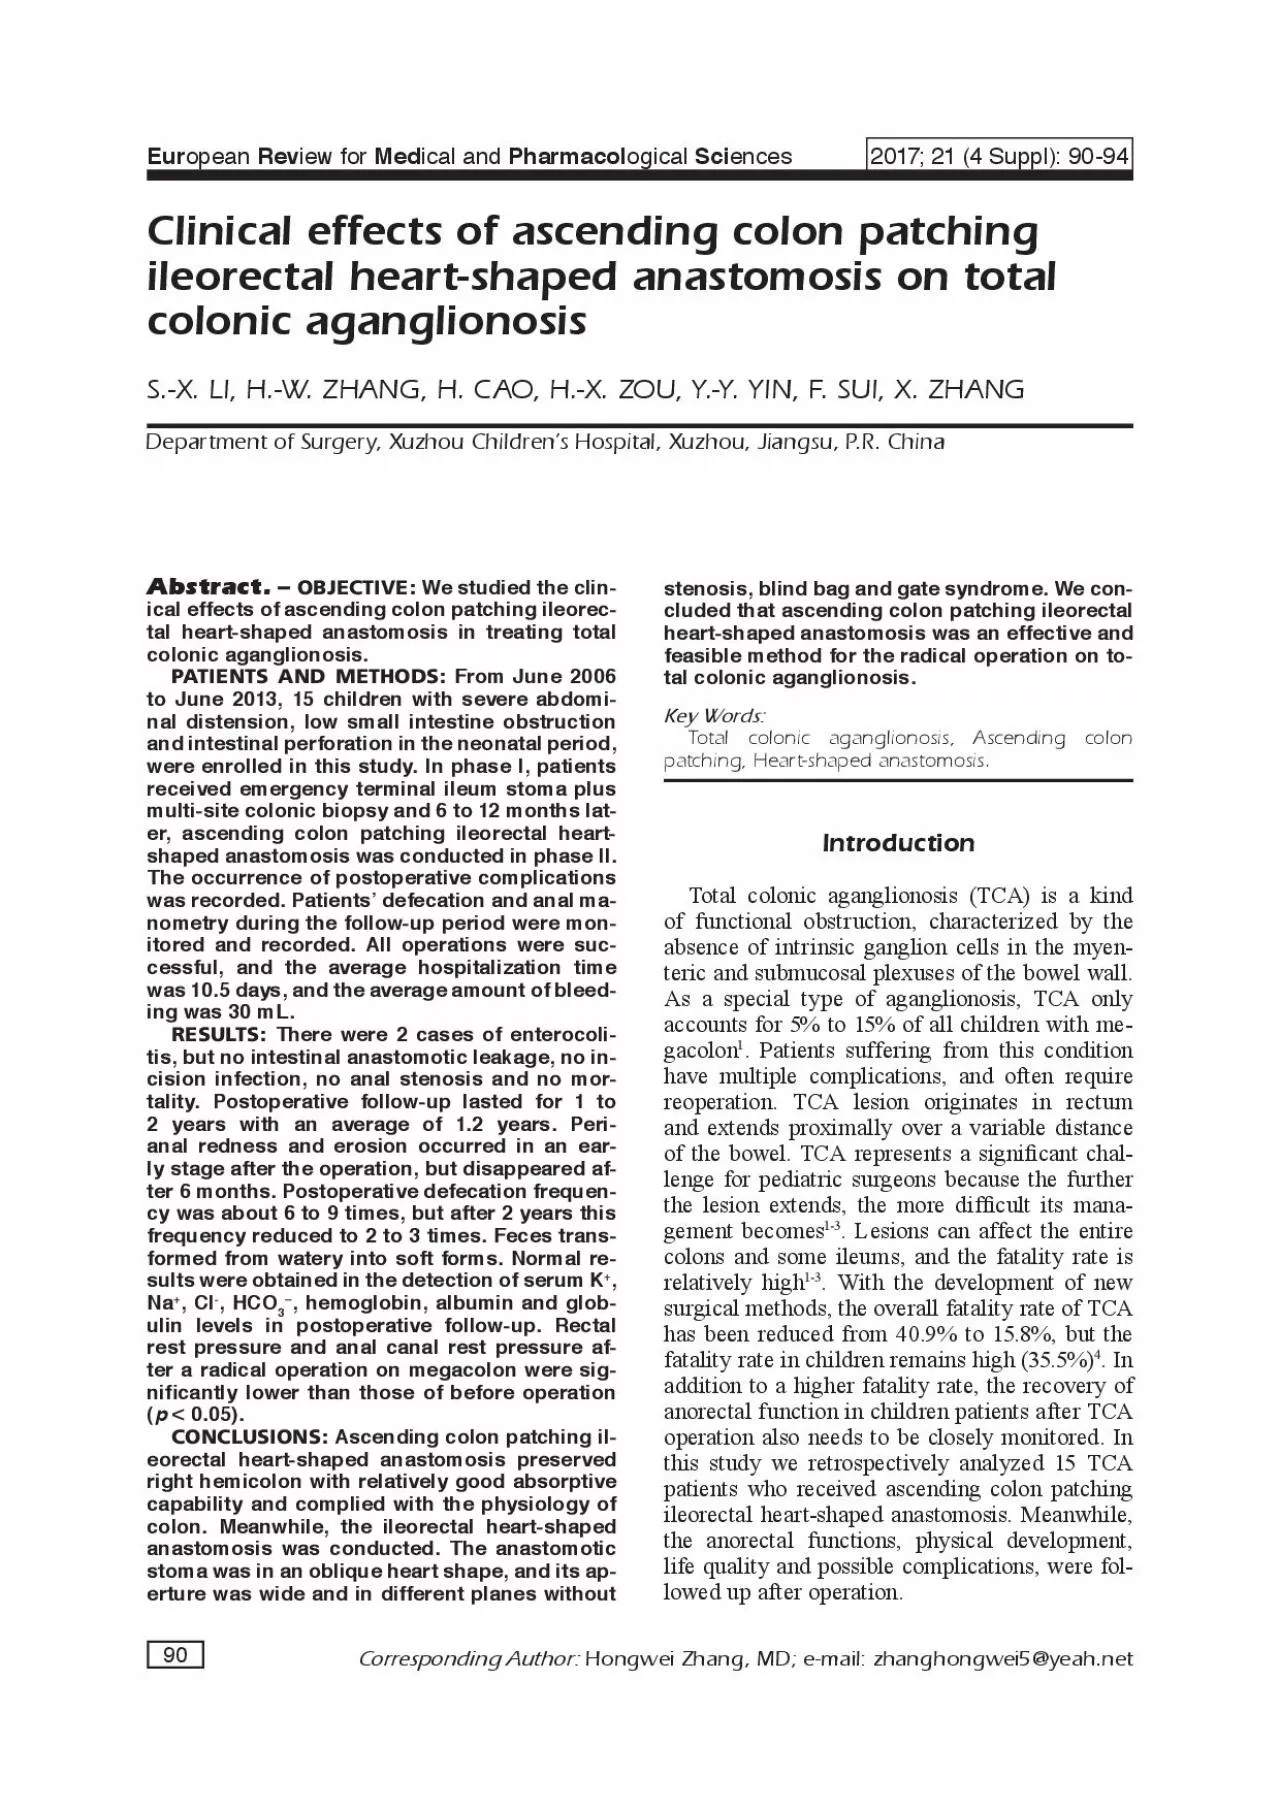 Abstract OBJECTIVE We studied the clinical effects of ascending colo